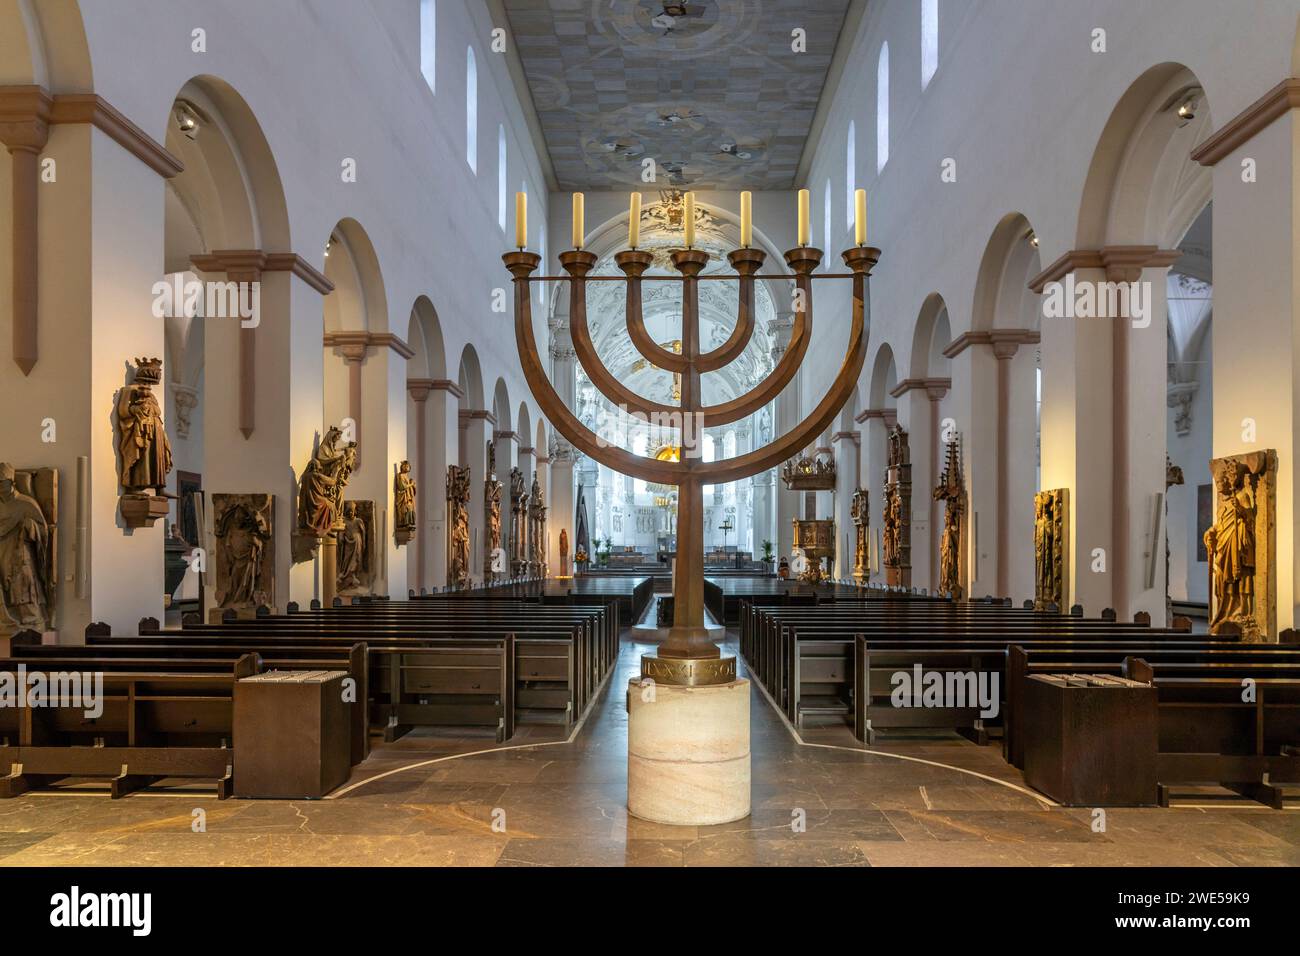 Seven-branched candlestick or menorah in the interior of Würzburg Cathedral, Würzburg, Bavaria, Germany Stock Photo